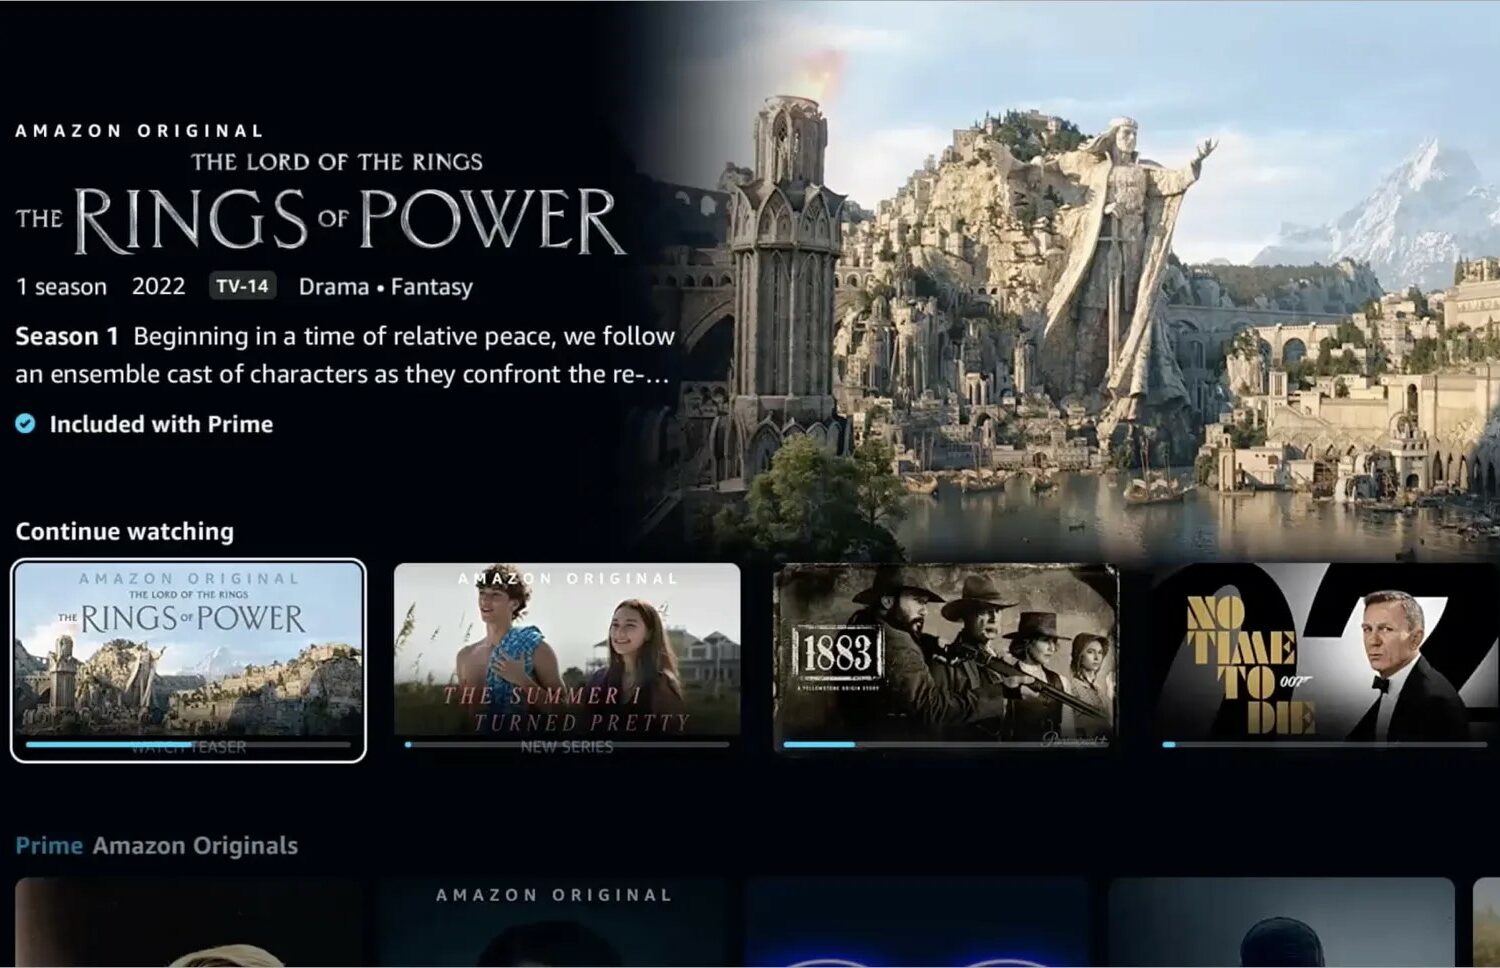 The redesigned Amazon Prime Video app on Apple TV, with the Continue WATching row on the Home section